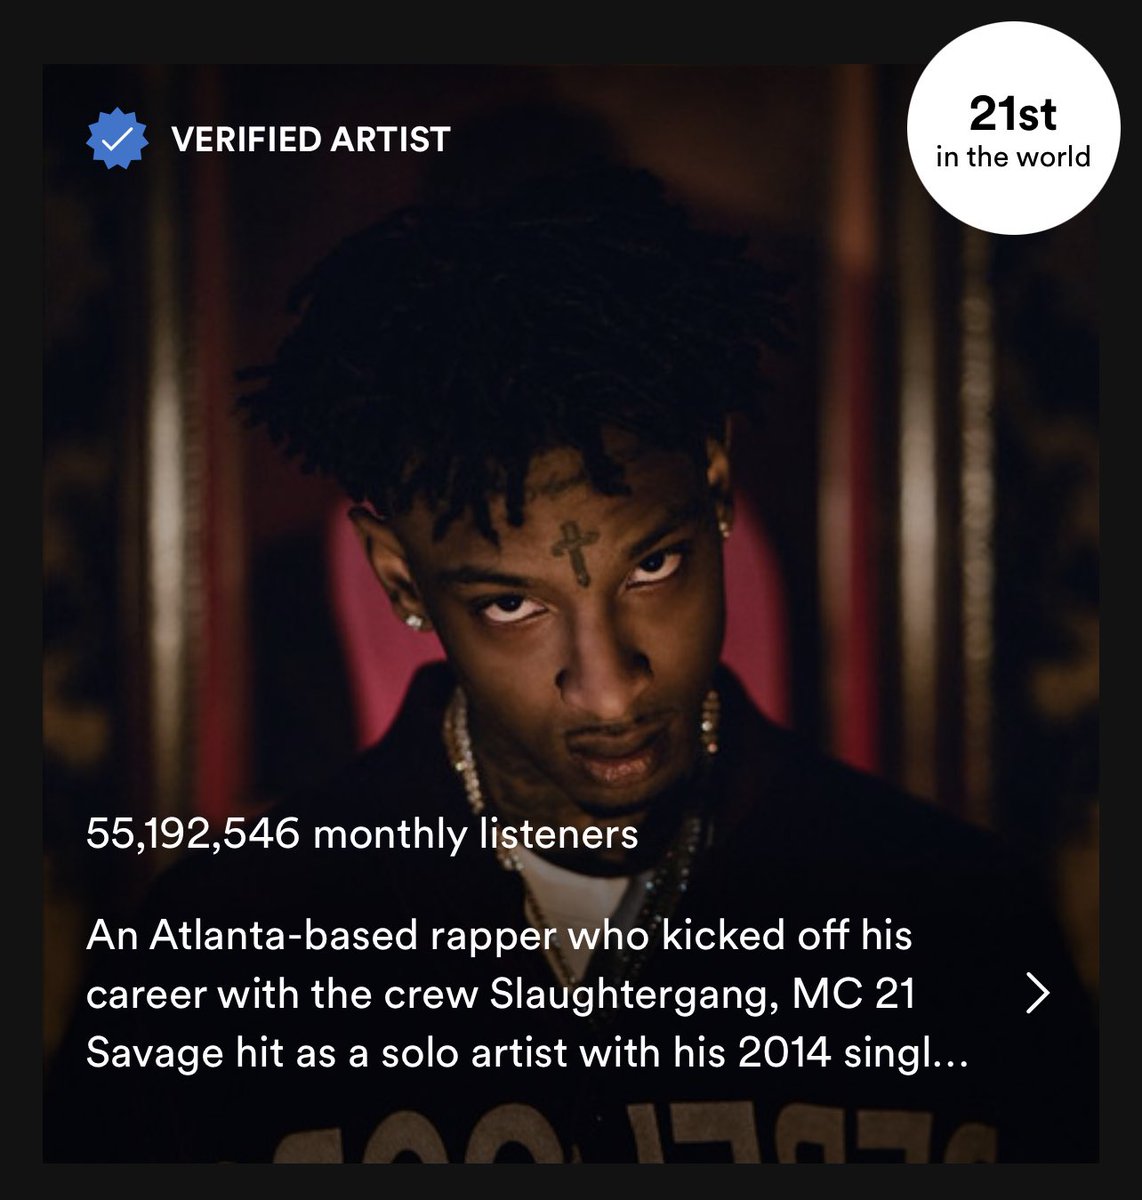 21 Savage is ranked the 21st in the world on Spotify 👀‼️